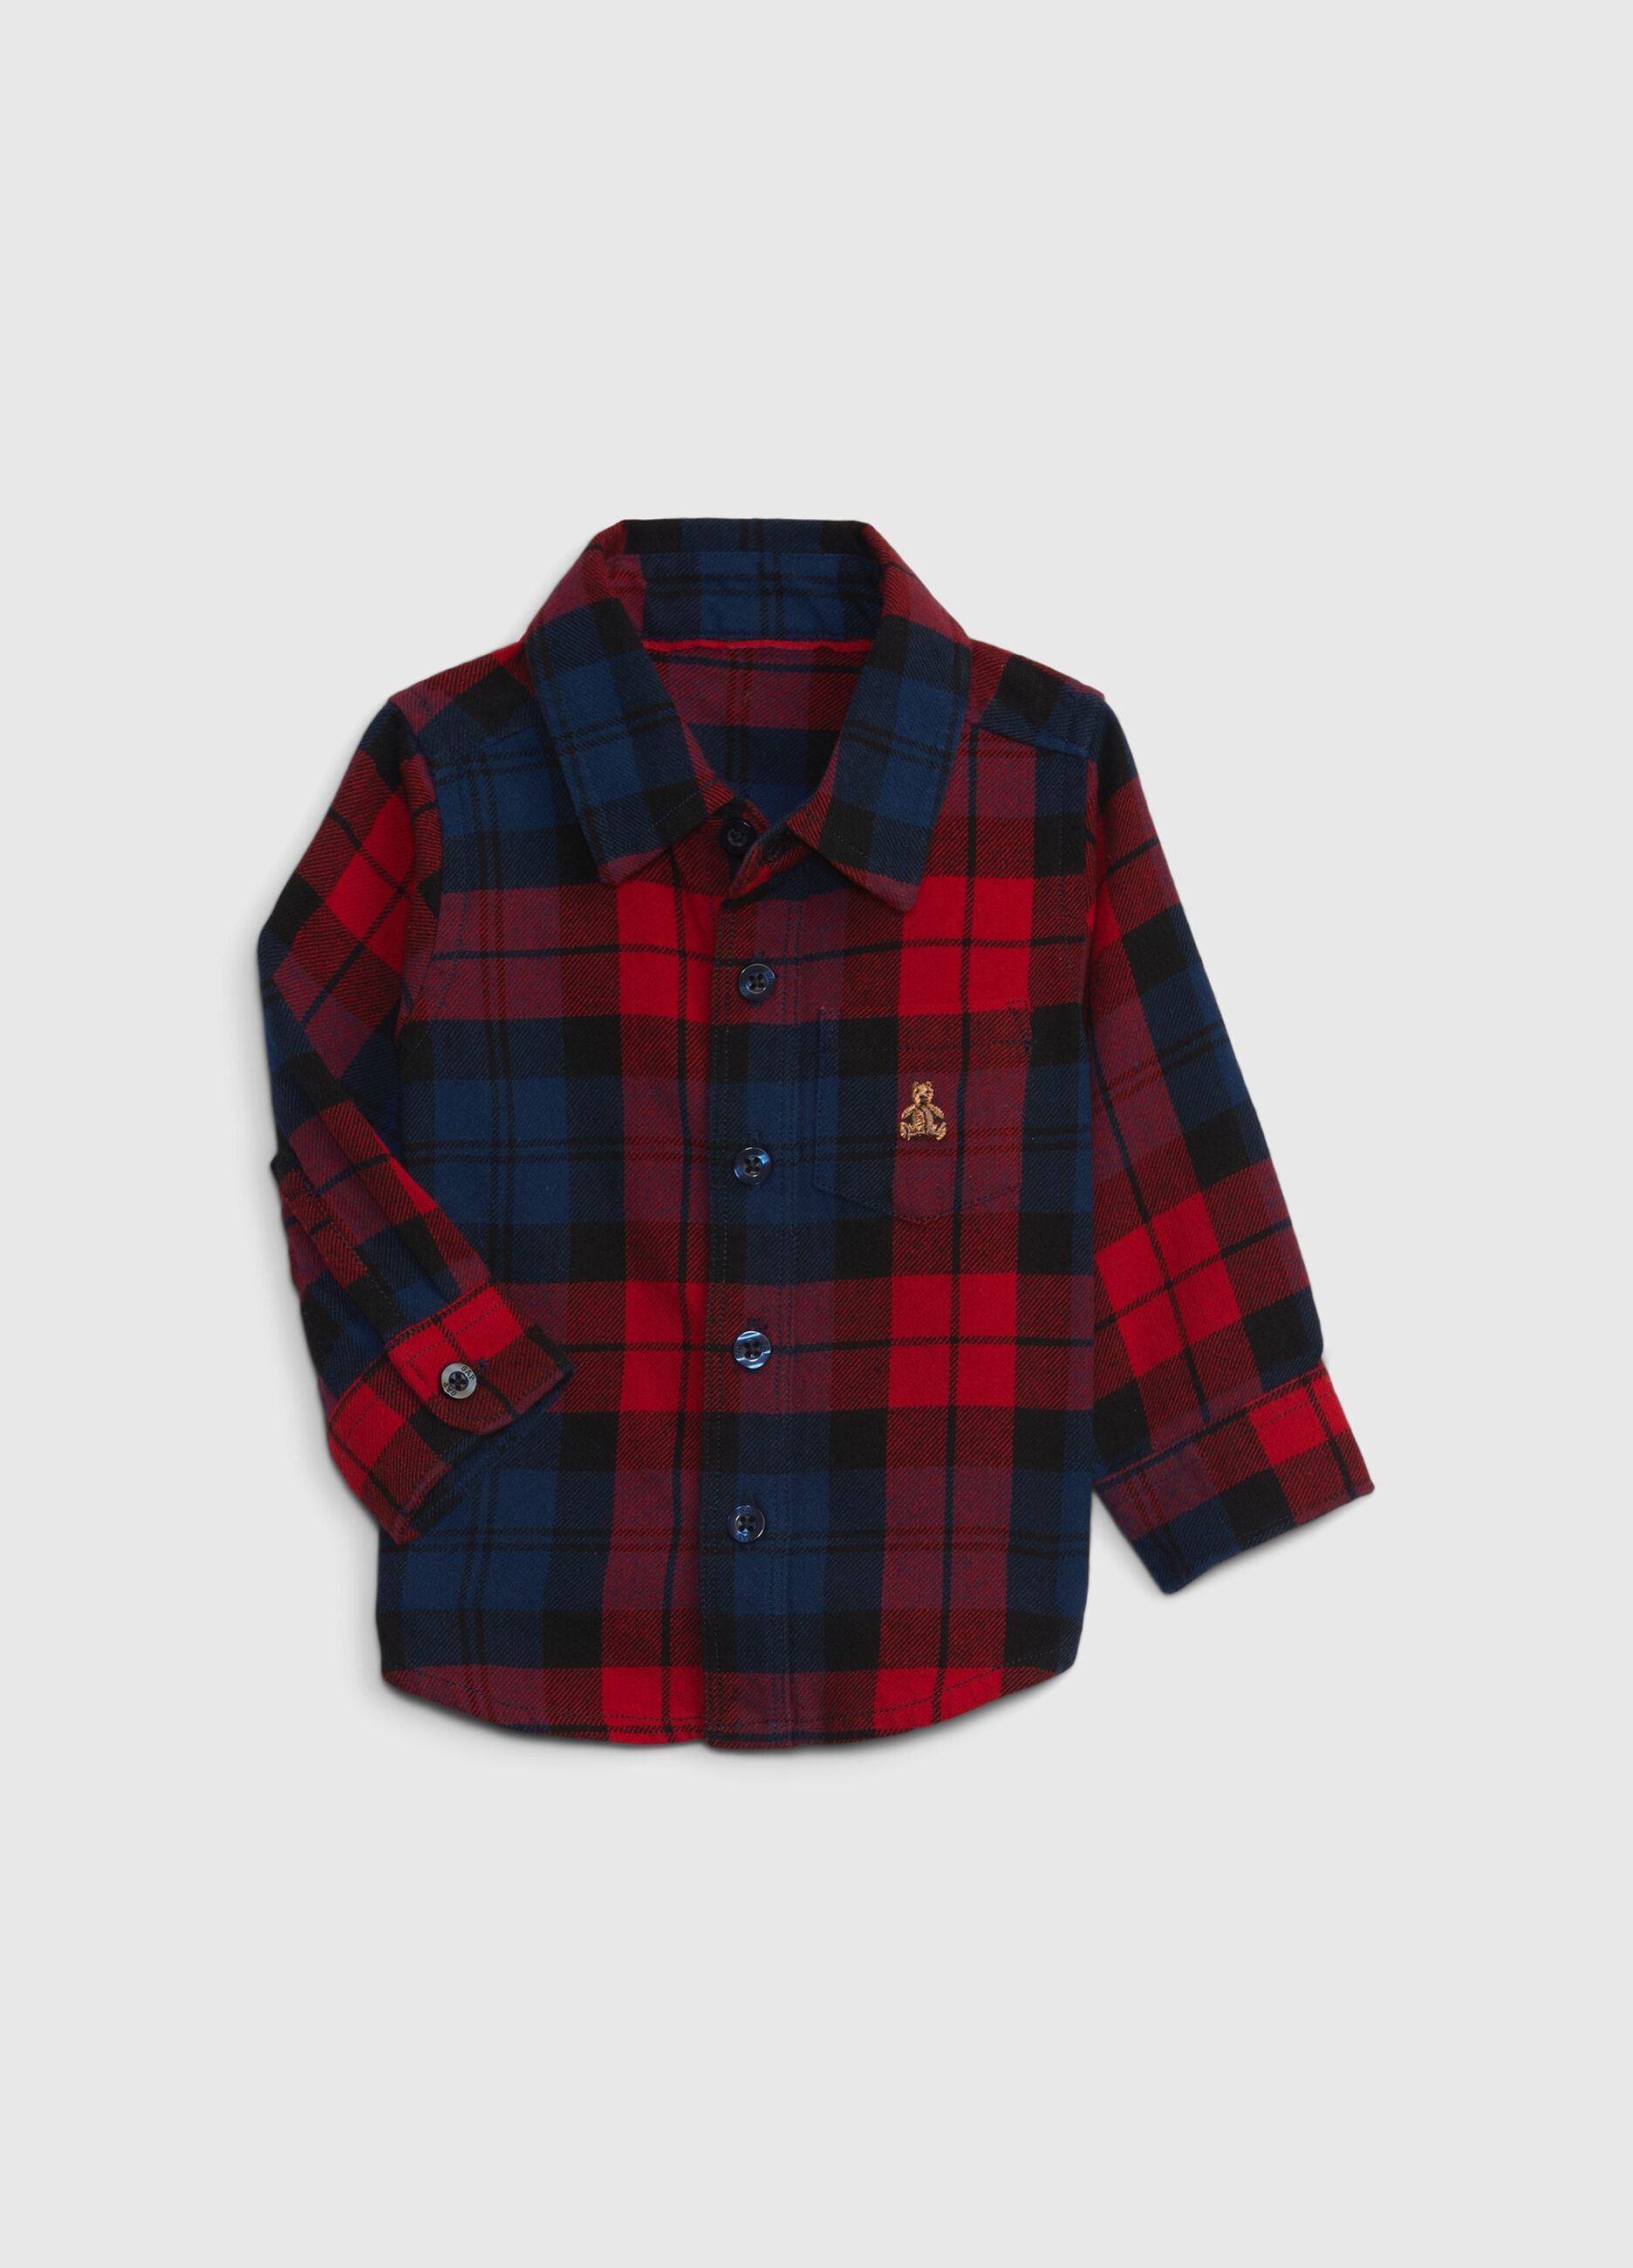 Tartan flannel shirt with embroidered bear